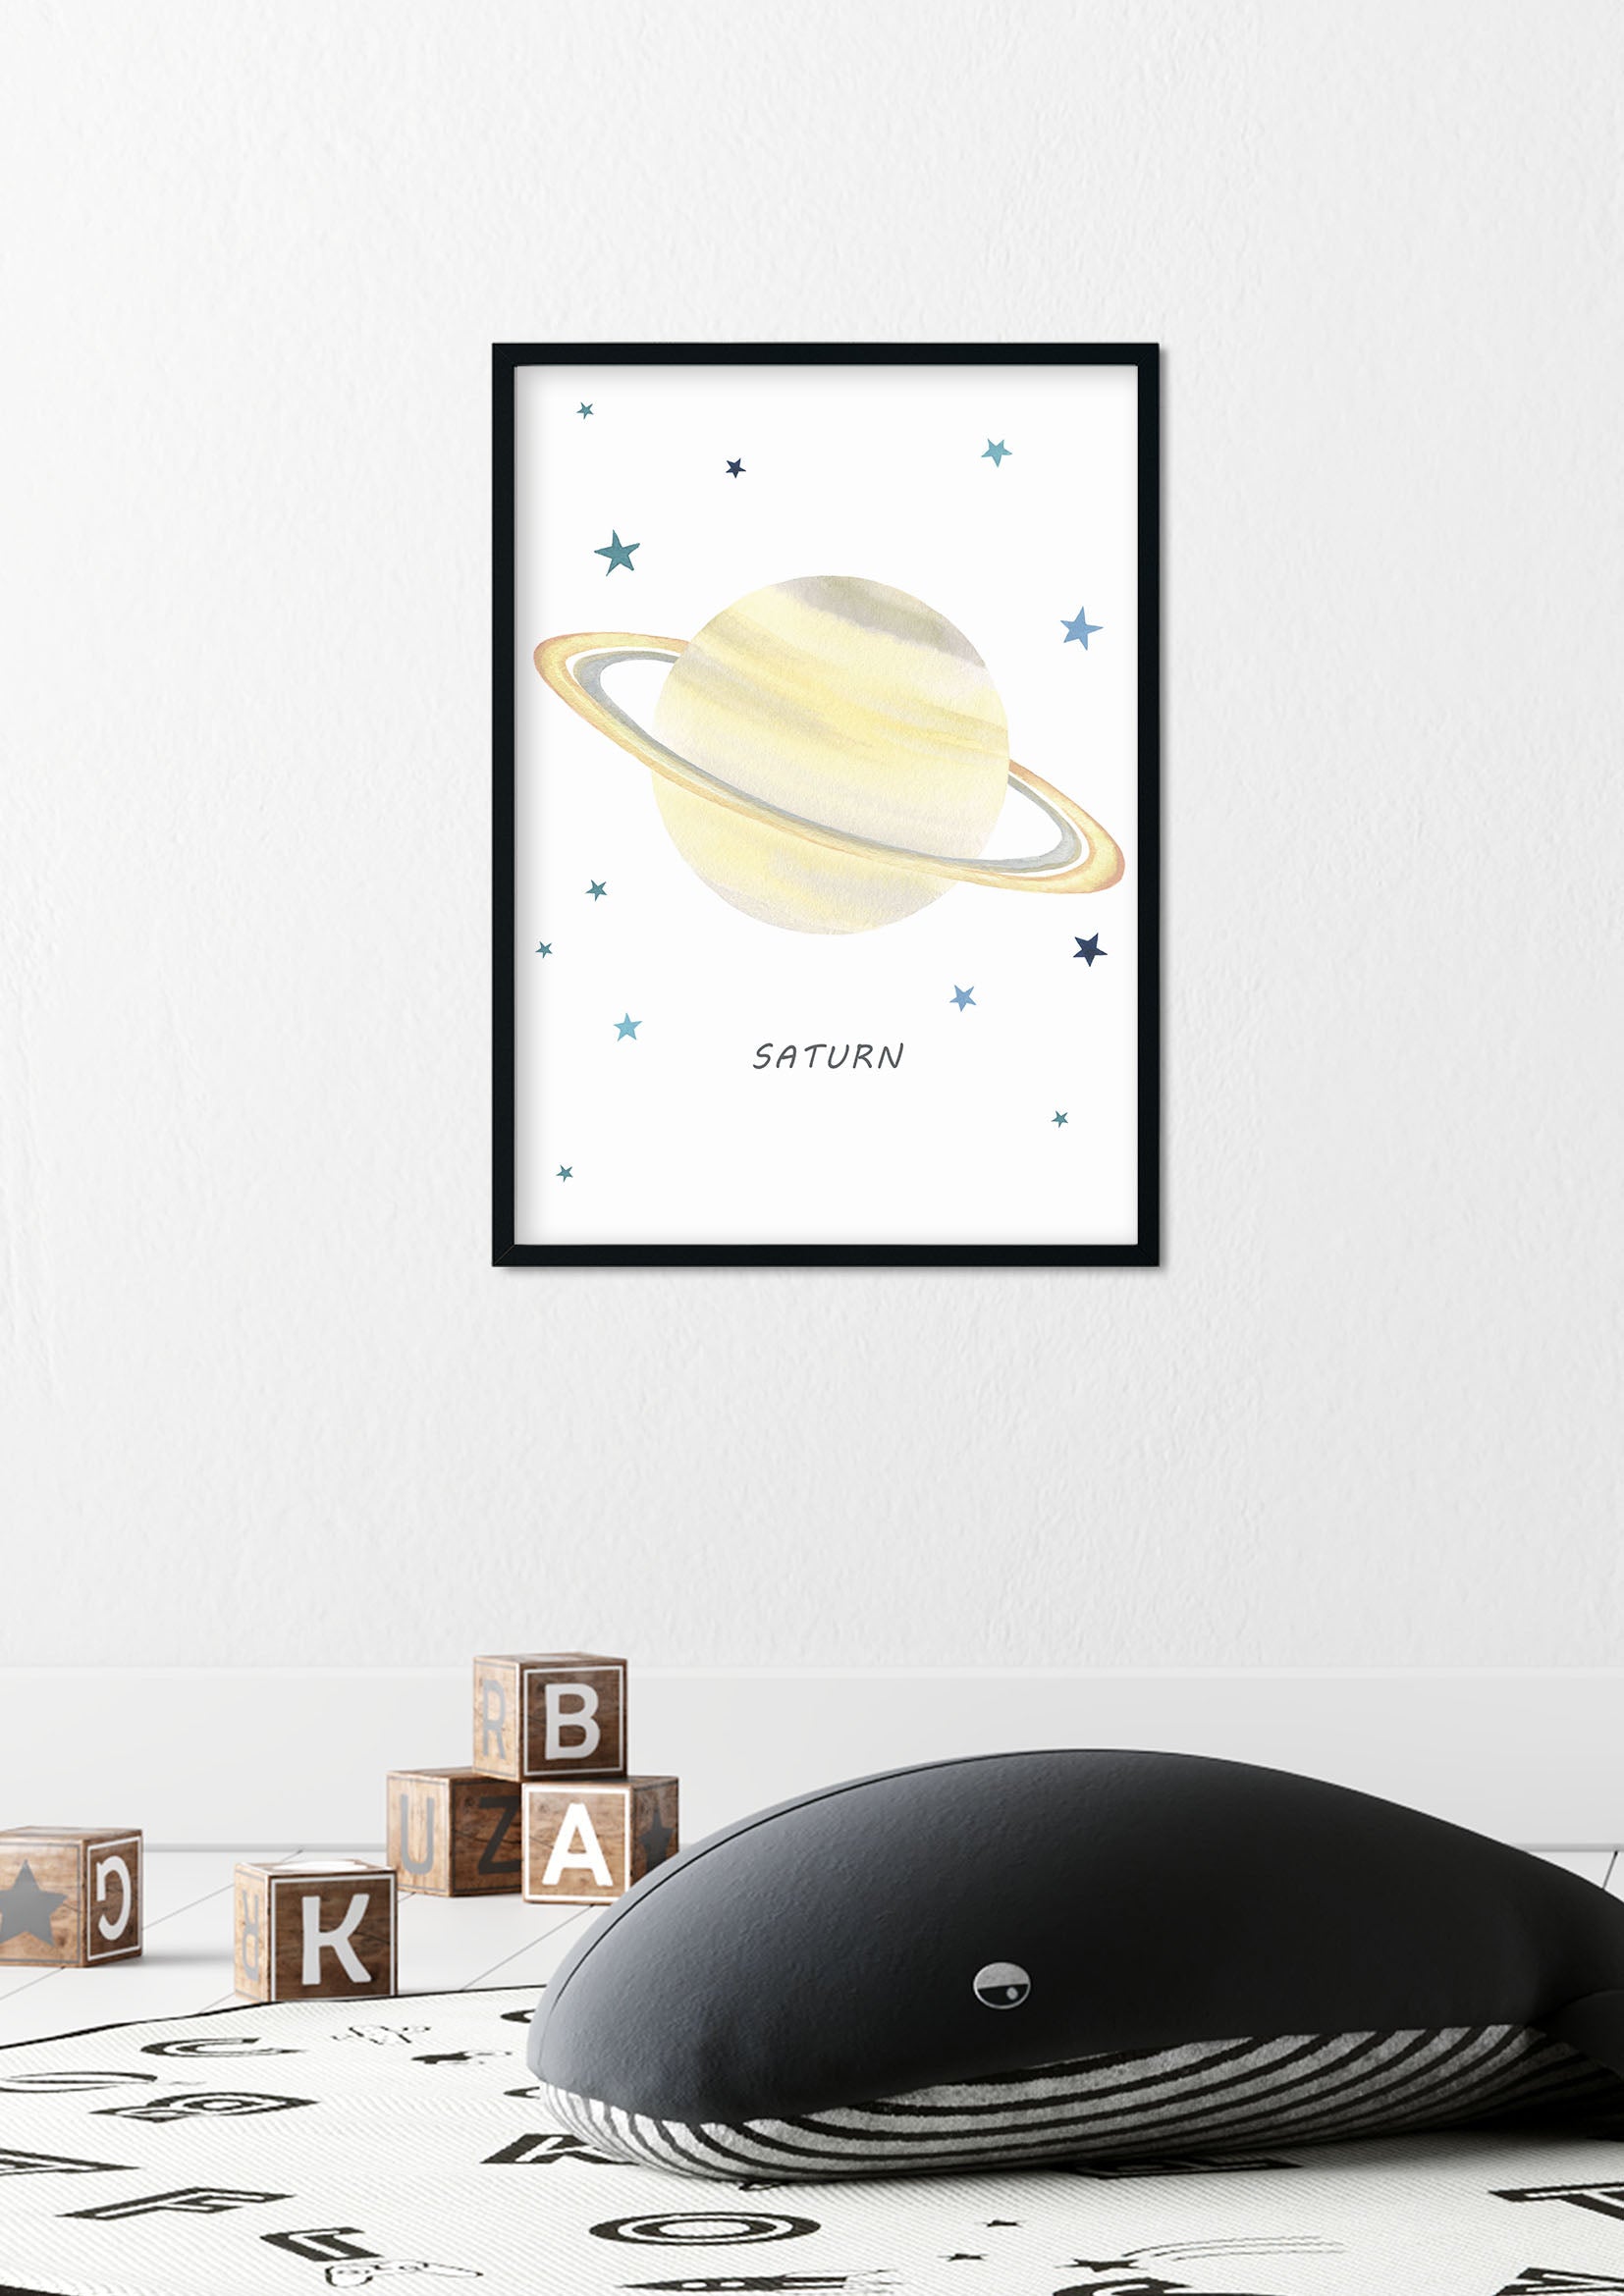 Planet Saturn Print - Outer Space Nursery - The Small Art Project - Modern Nursery Prints